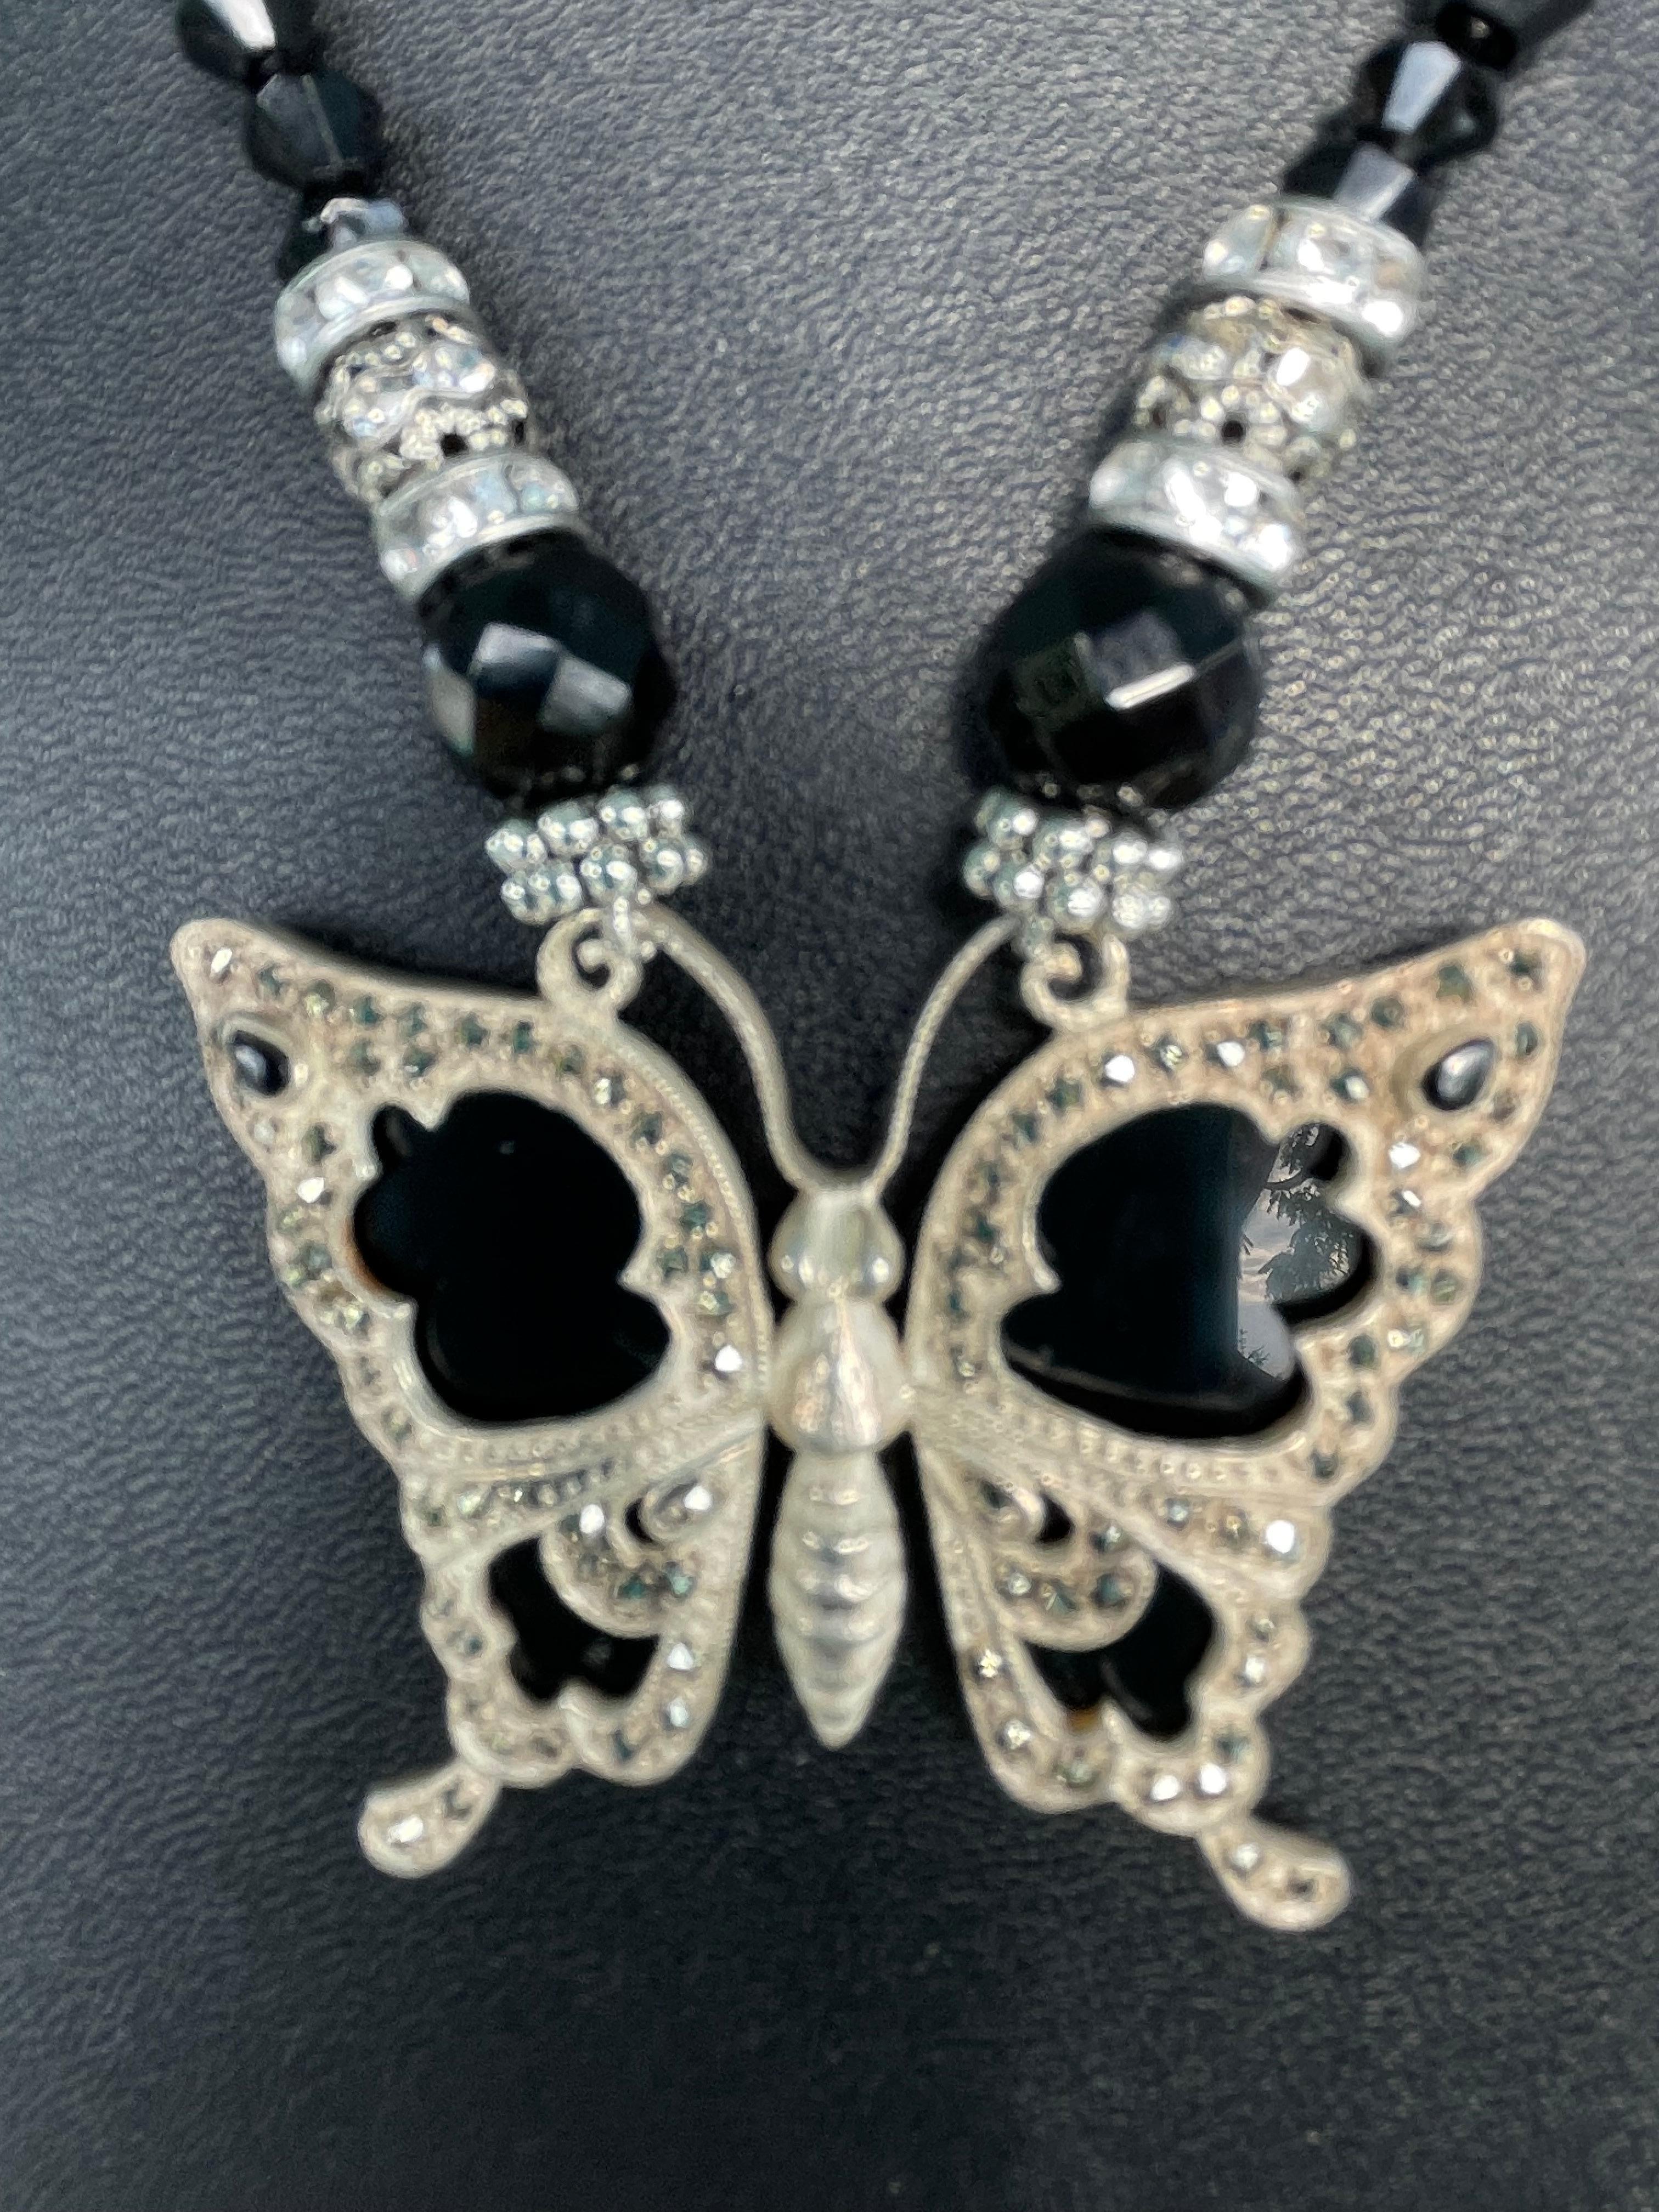 Lorraine’s Bijoux offers an antique Sterling Silver, onyx, ,and marcasite butterfly pendant necklace.
This is a one of a kind , handmade piece with onyx beads, crystal rondelles, and crystal inlaid cage beads comprising the string of beads. 
A large